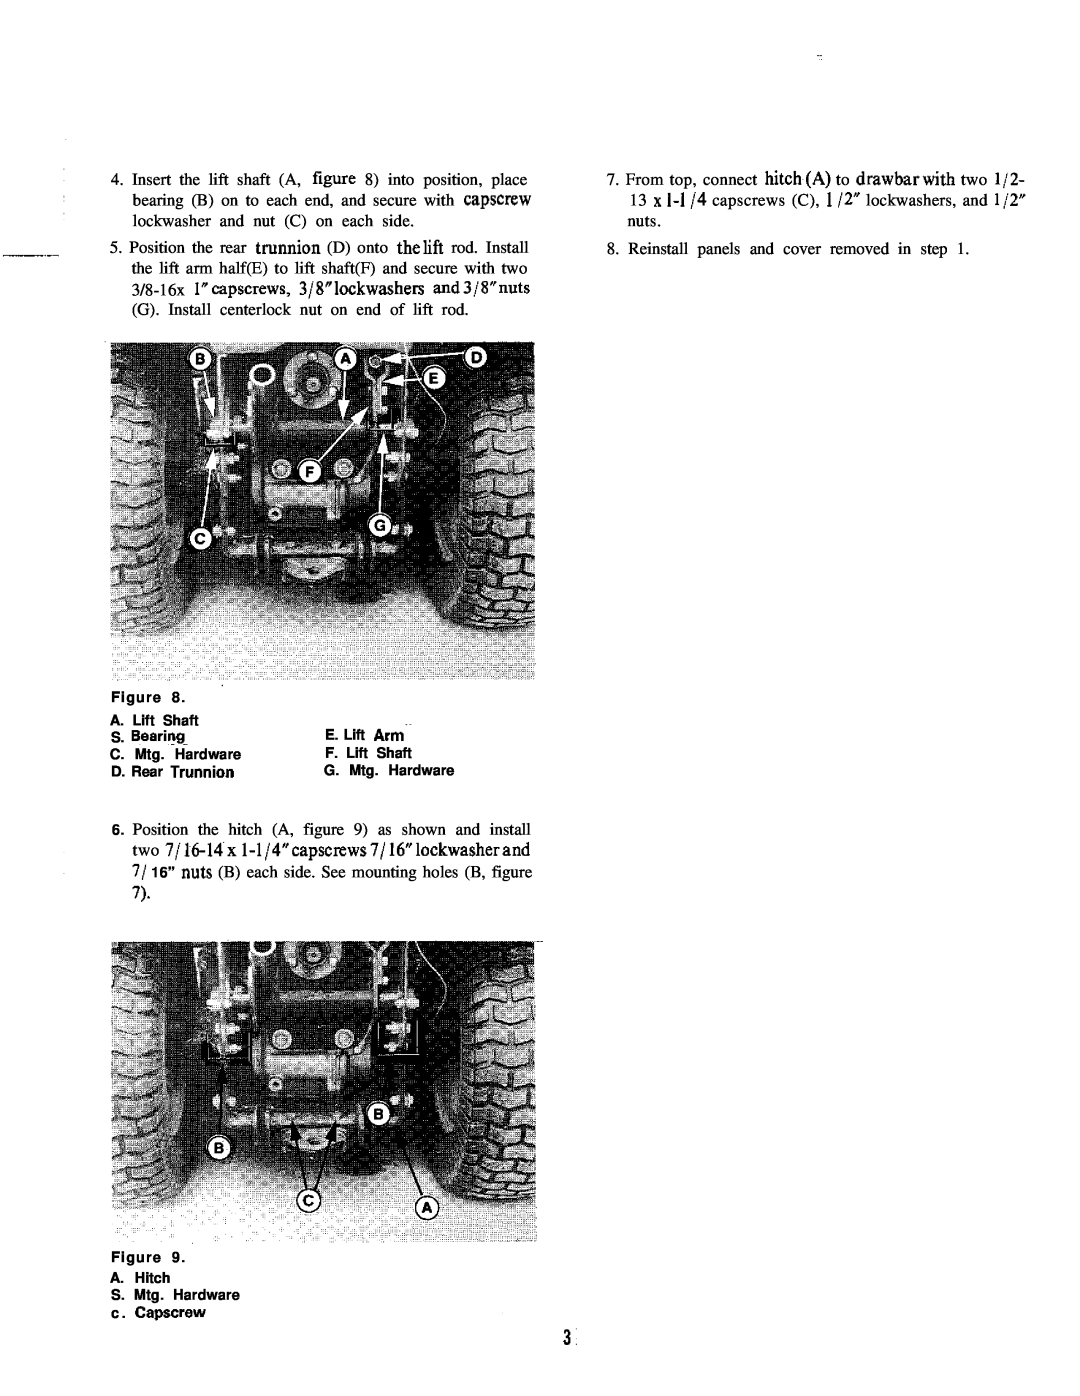 Snapper 1691765 installation instructions 3/8-16x l”capscrews, 3/8”lockwashers and3/8”nuts 